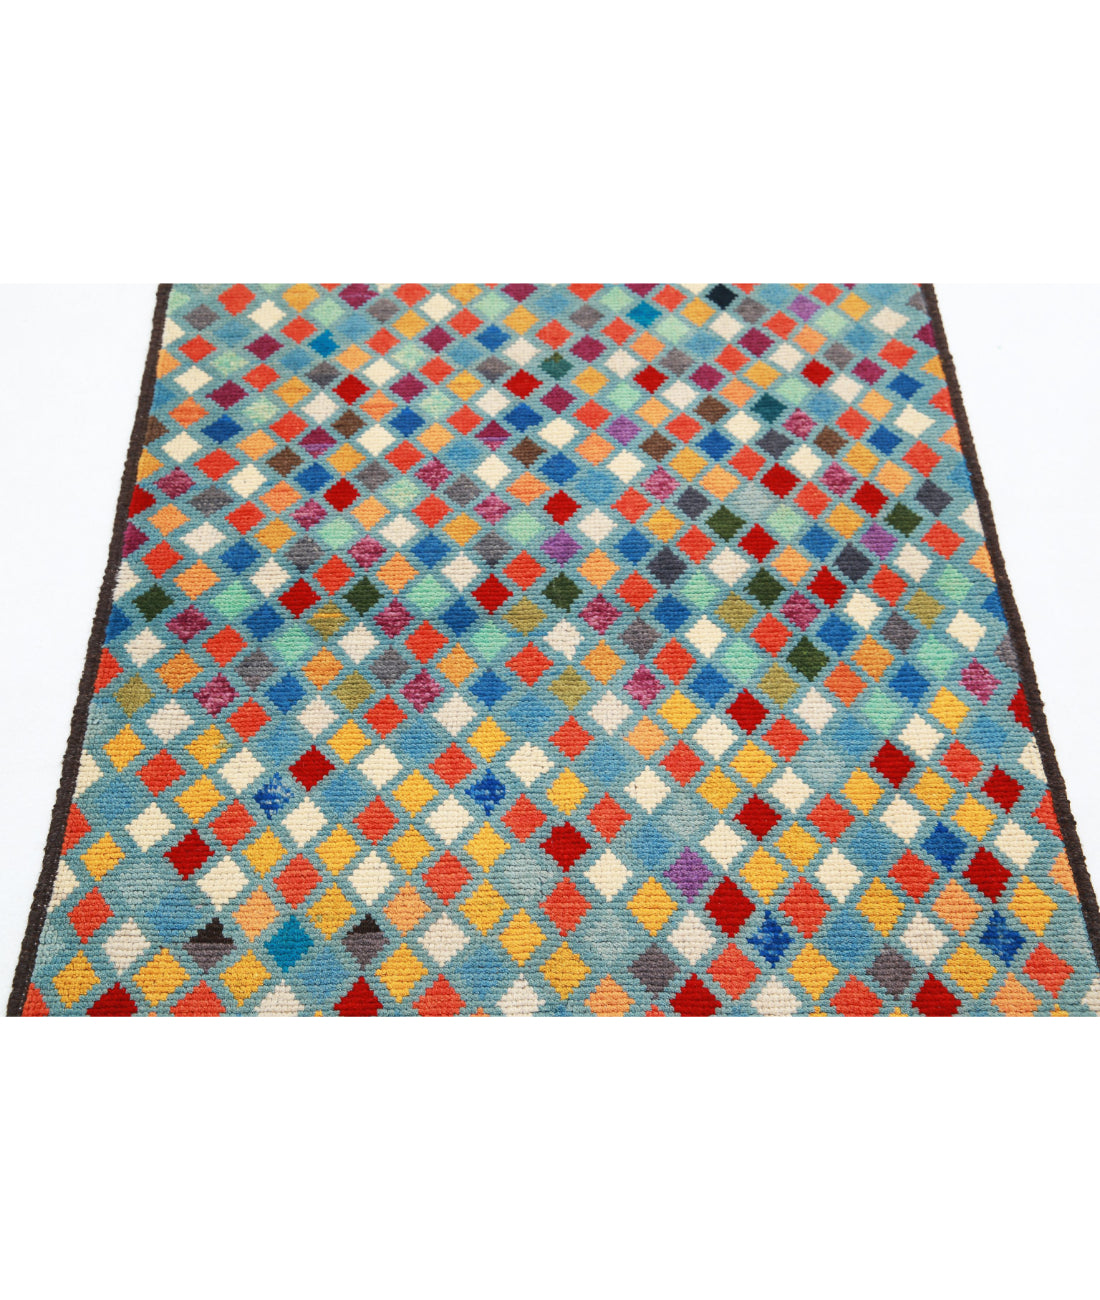 Revival 3'4'' X 4'11'' Hand-Knotted Wool Rug 3'4'' x 4'11'' (100 X 148) / Multi / Multi